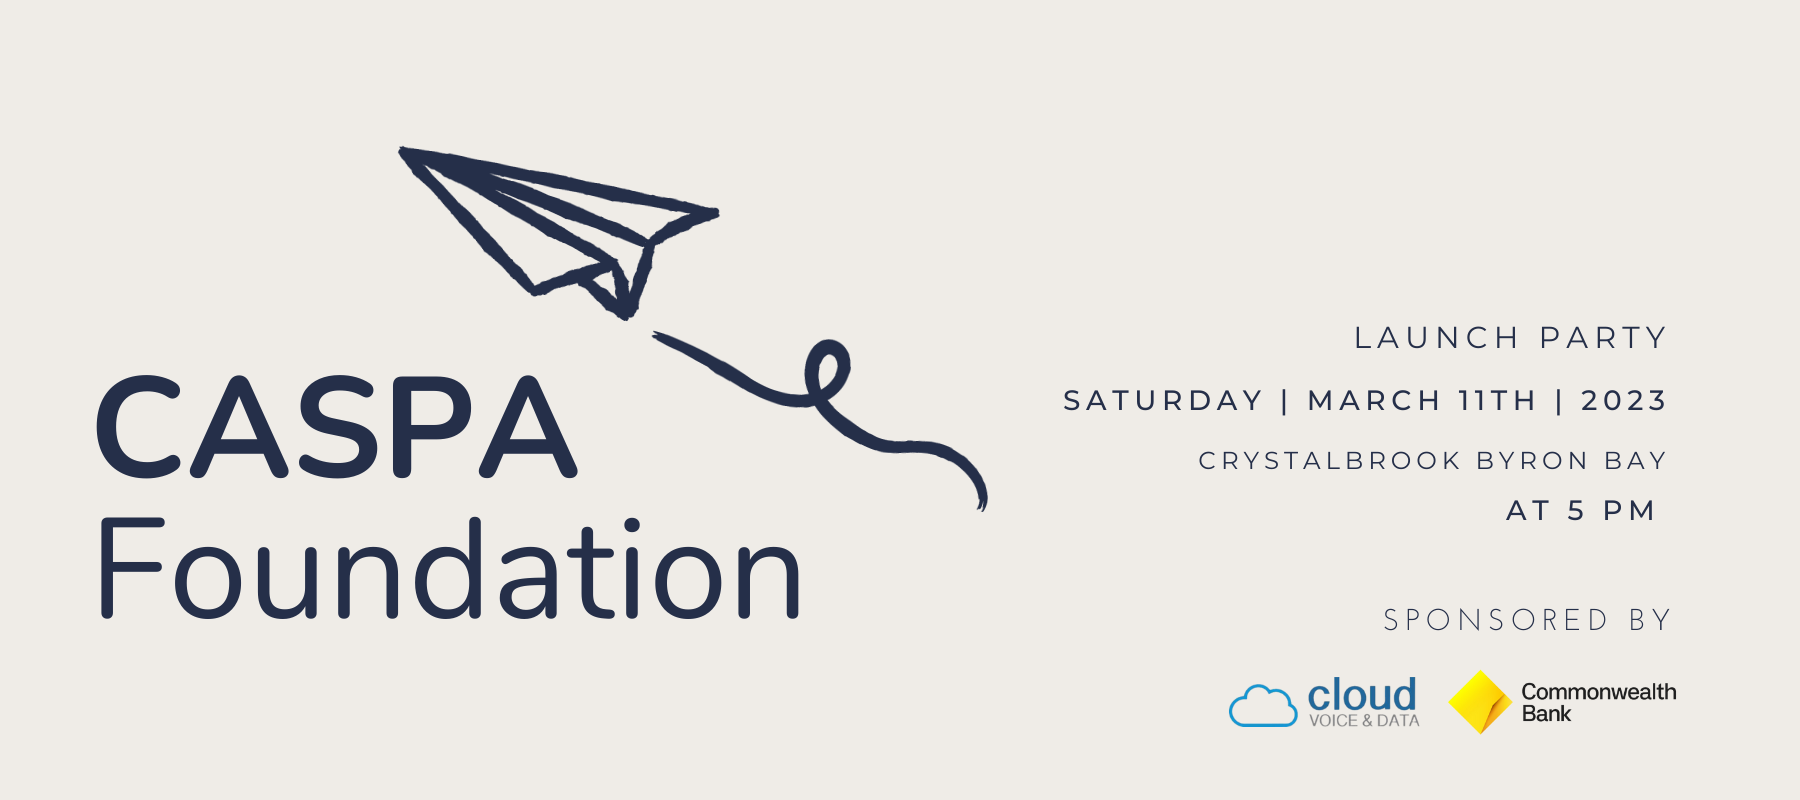 Foundation launch party invitation (1800 × 800 px) (1)